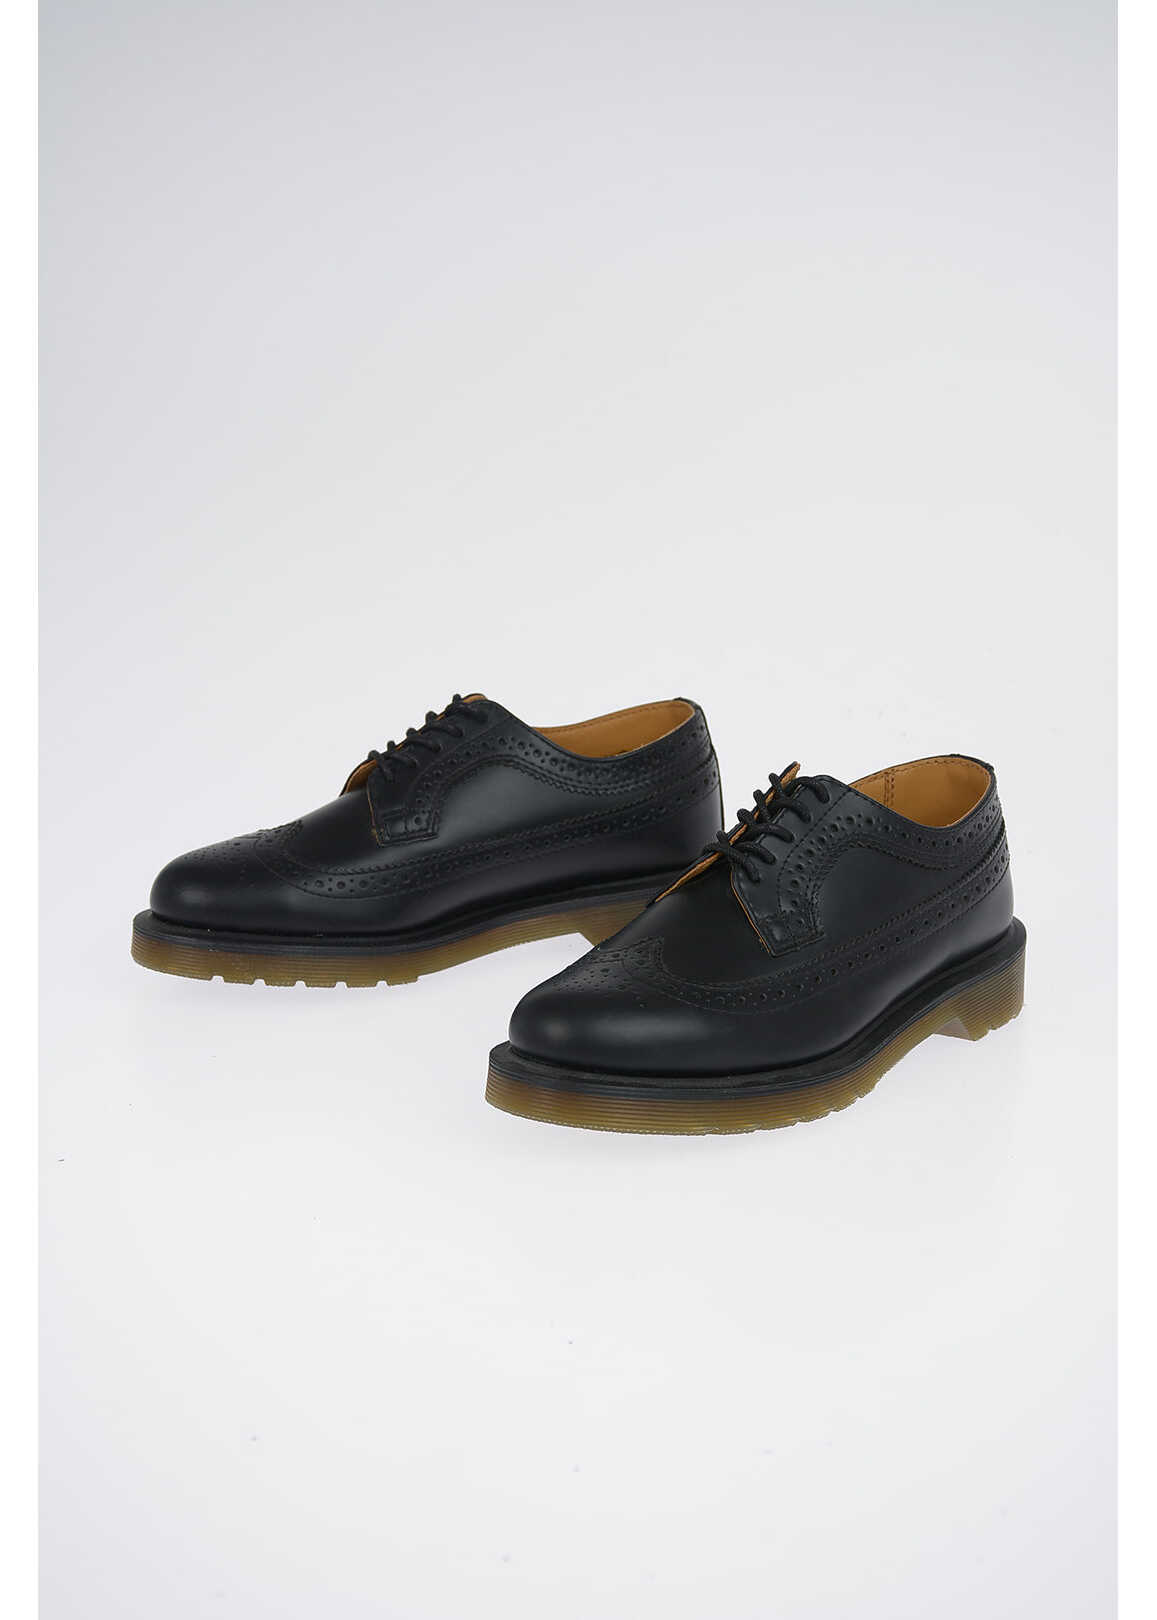 Dr. Martens Leather Smooth Brogue Derby Shoes* Black image6